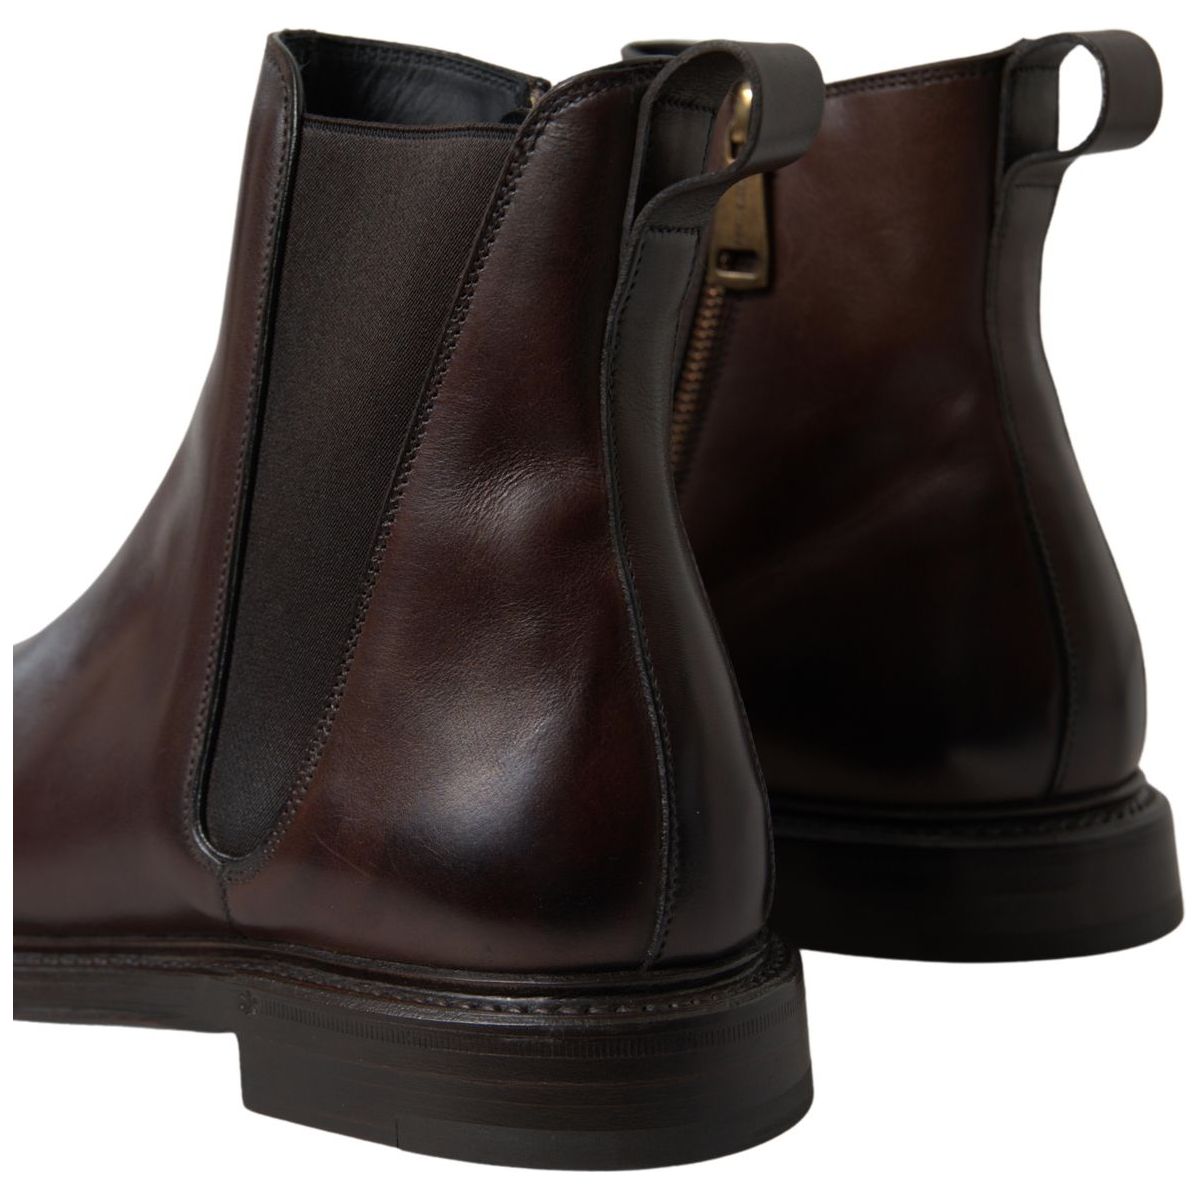 Dolce & Gabbana Elegant Leather Chelsea Boots brown-leather-chelsea-mens-boots-shoes